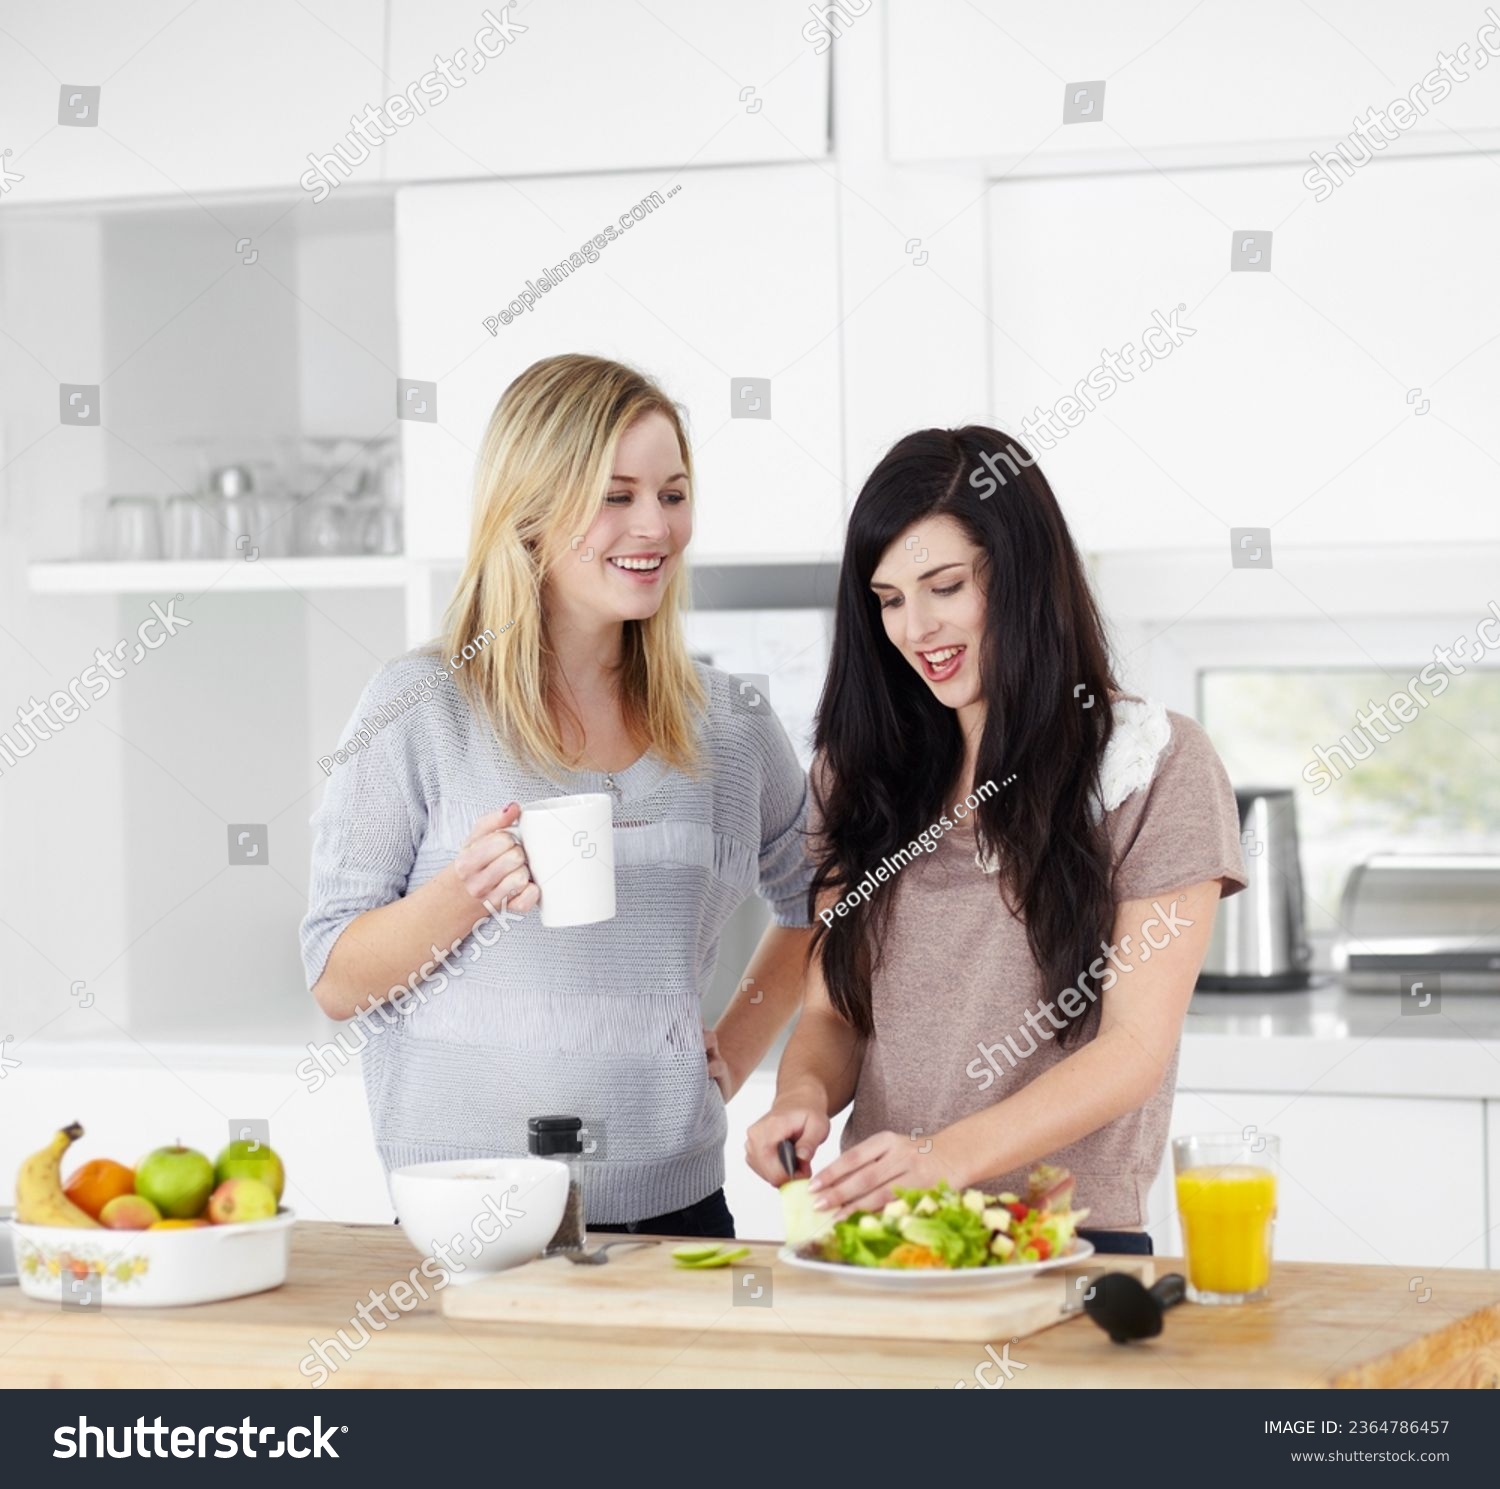 Kitchen, friends and vegan women with salad for healthy eating, meal and lunch together at home. Food, nutrition and happy female people smile with drink and vegetables for diet, wellness and detox #2364786457